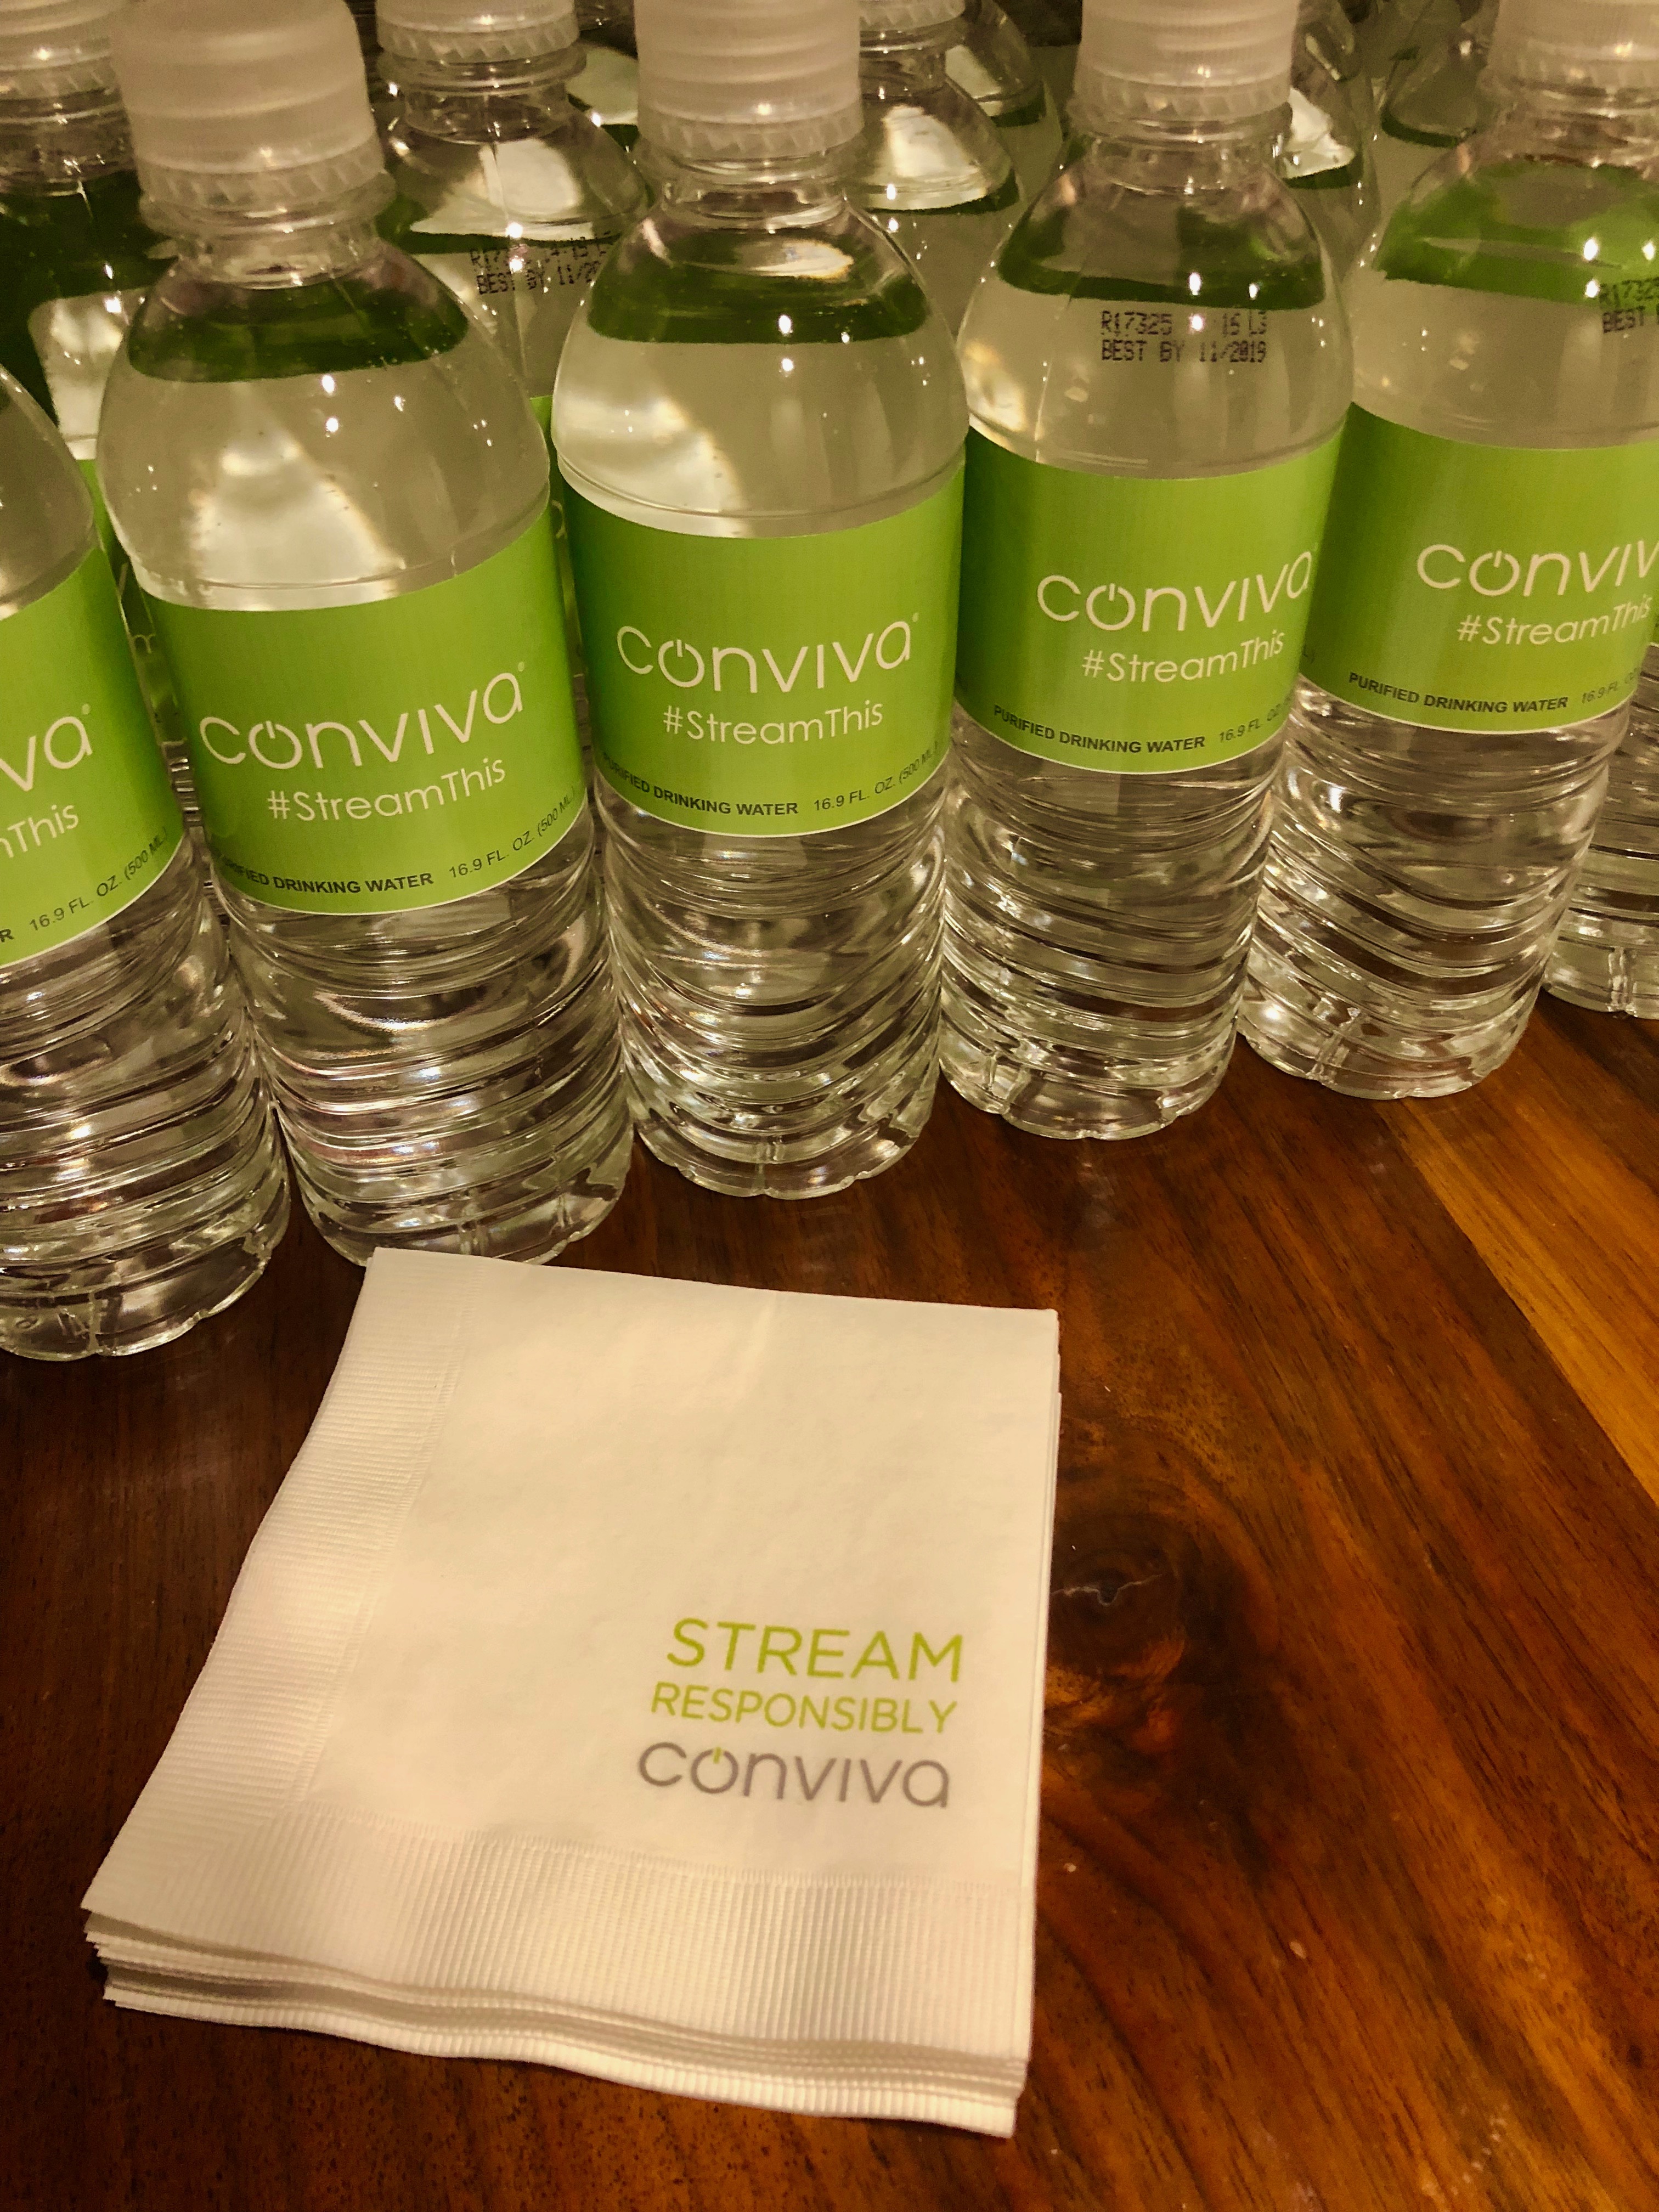 Conviva's Custom Bottled Water and Tissue at CES